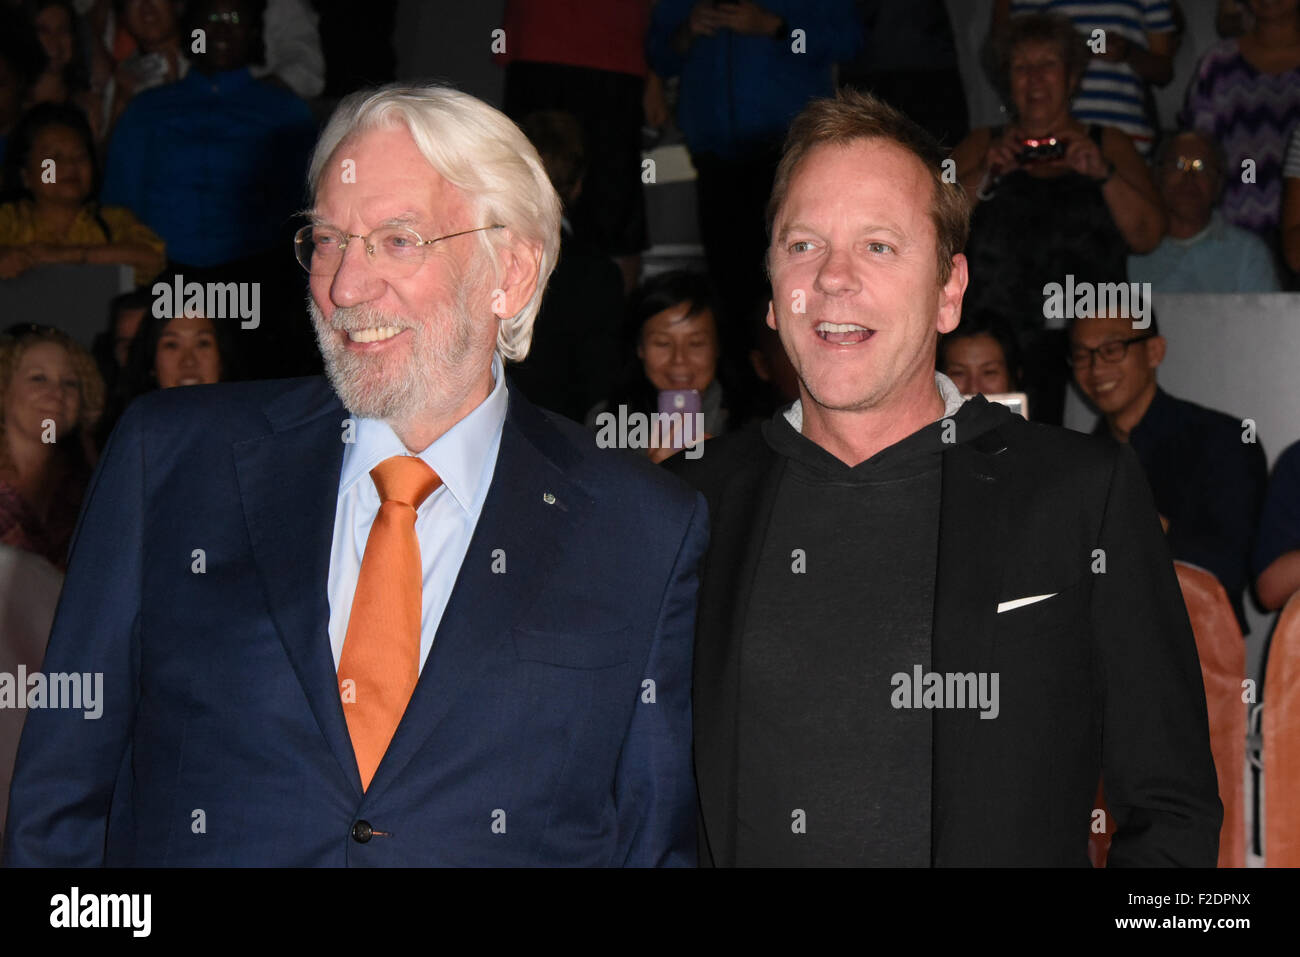 Toronto, Ontario, Canada. 16th Sep, 2015. Actor DONALD SUTHERLAND and his son actor KIEFER SUTHERLAND attend the 'Forsaken' premiere during the 2015 Toronto International Film Festival at Roy Thomson Hall on September 16, 2015 in Toronto, Canada. Credit:  Igor Vidyashev/ZUMA Wire/Alamy Live News Stock Photo